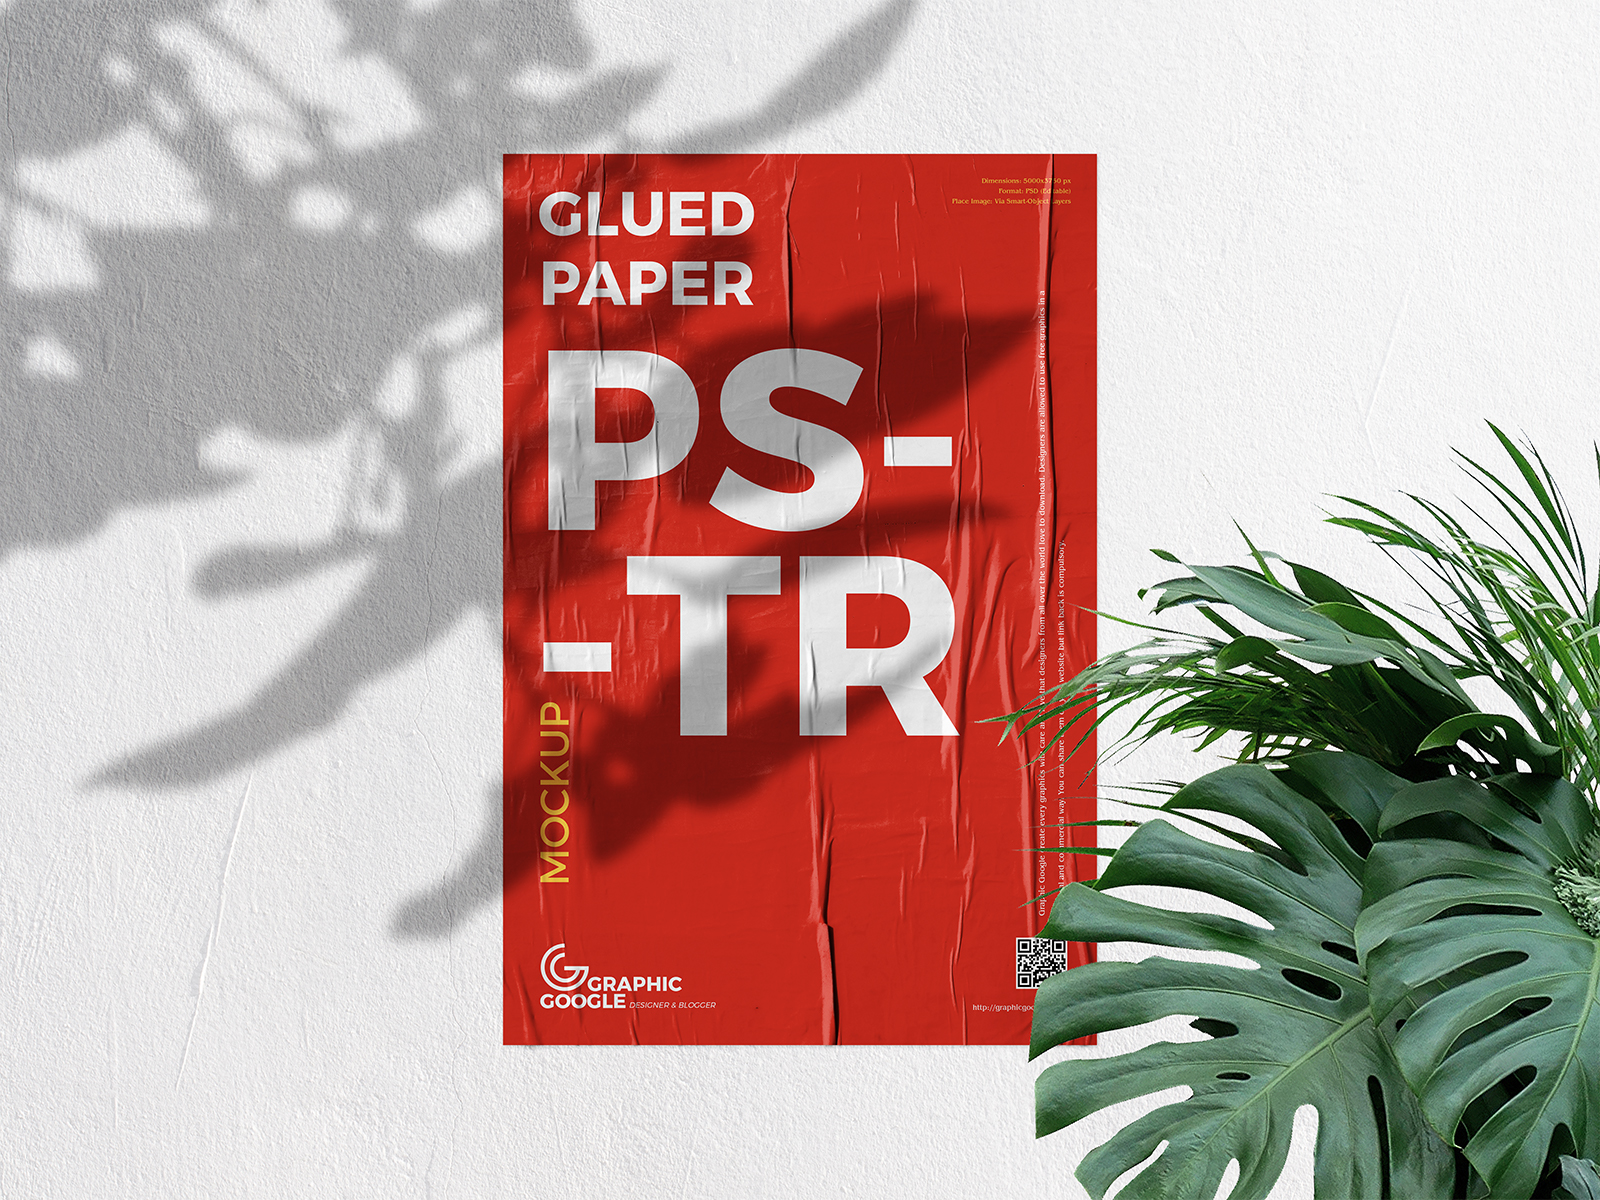 Download Free Glued Poster Mockup on a Concrete Wall | Free Mockup